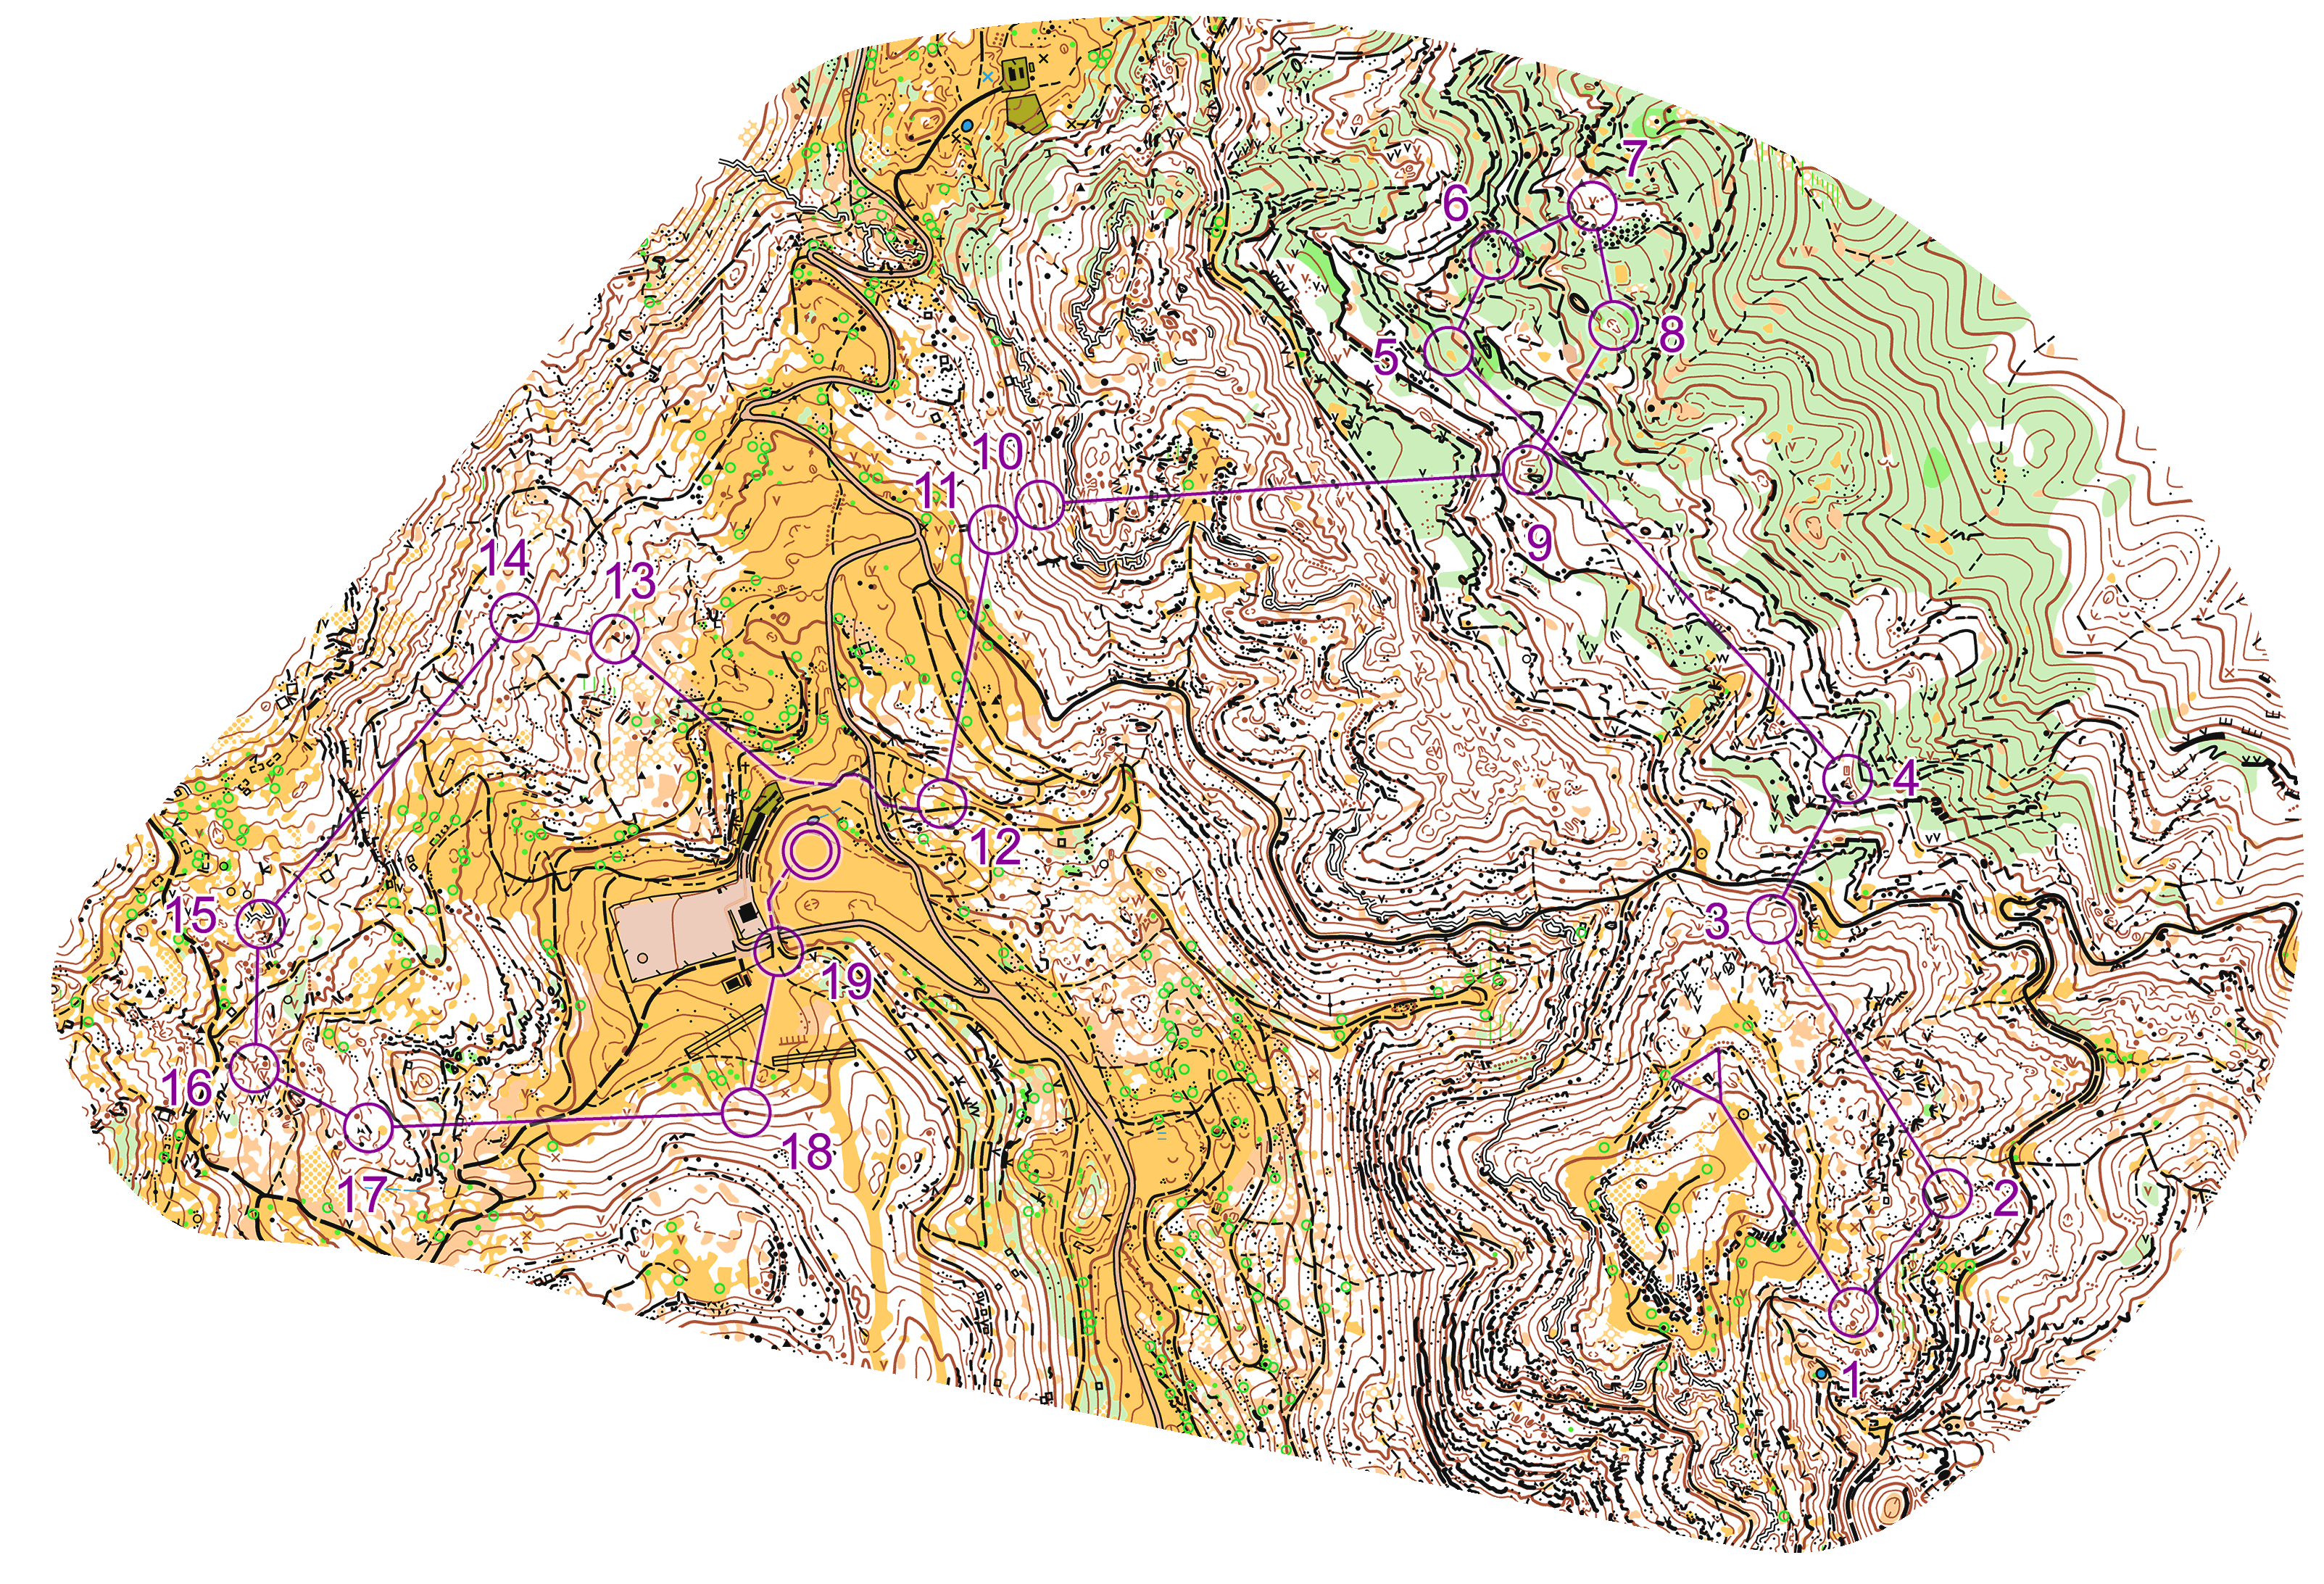 WOC Middle (2014-07-11)